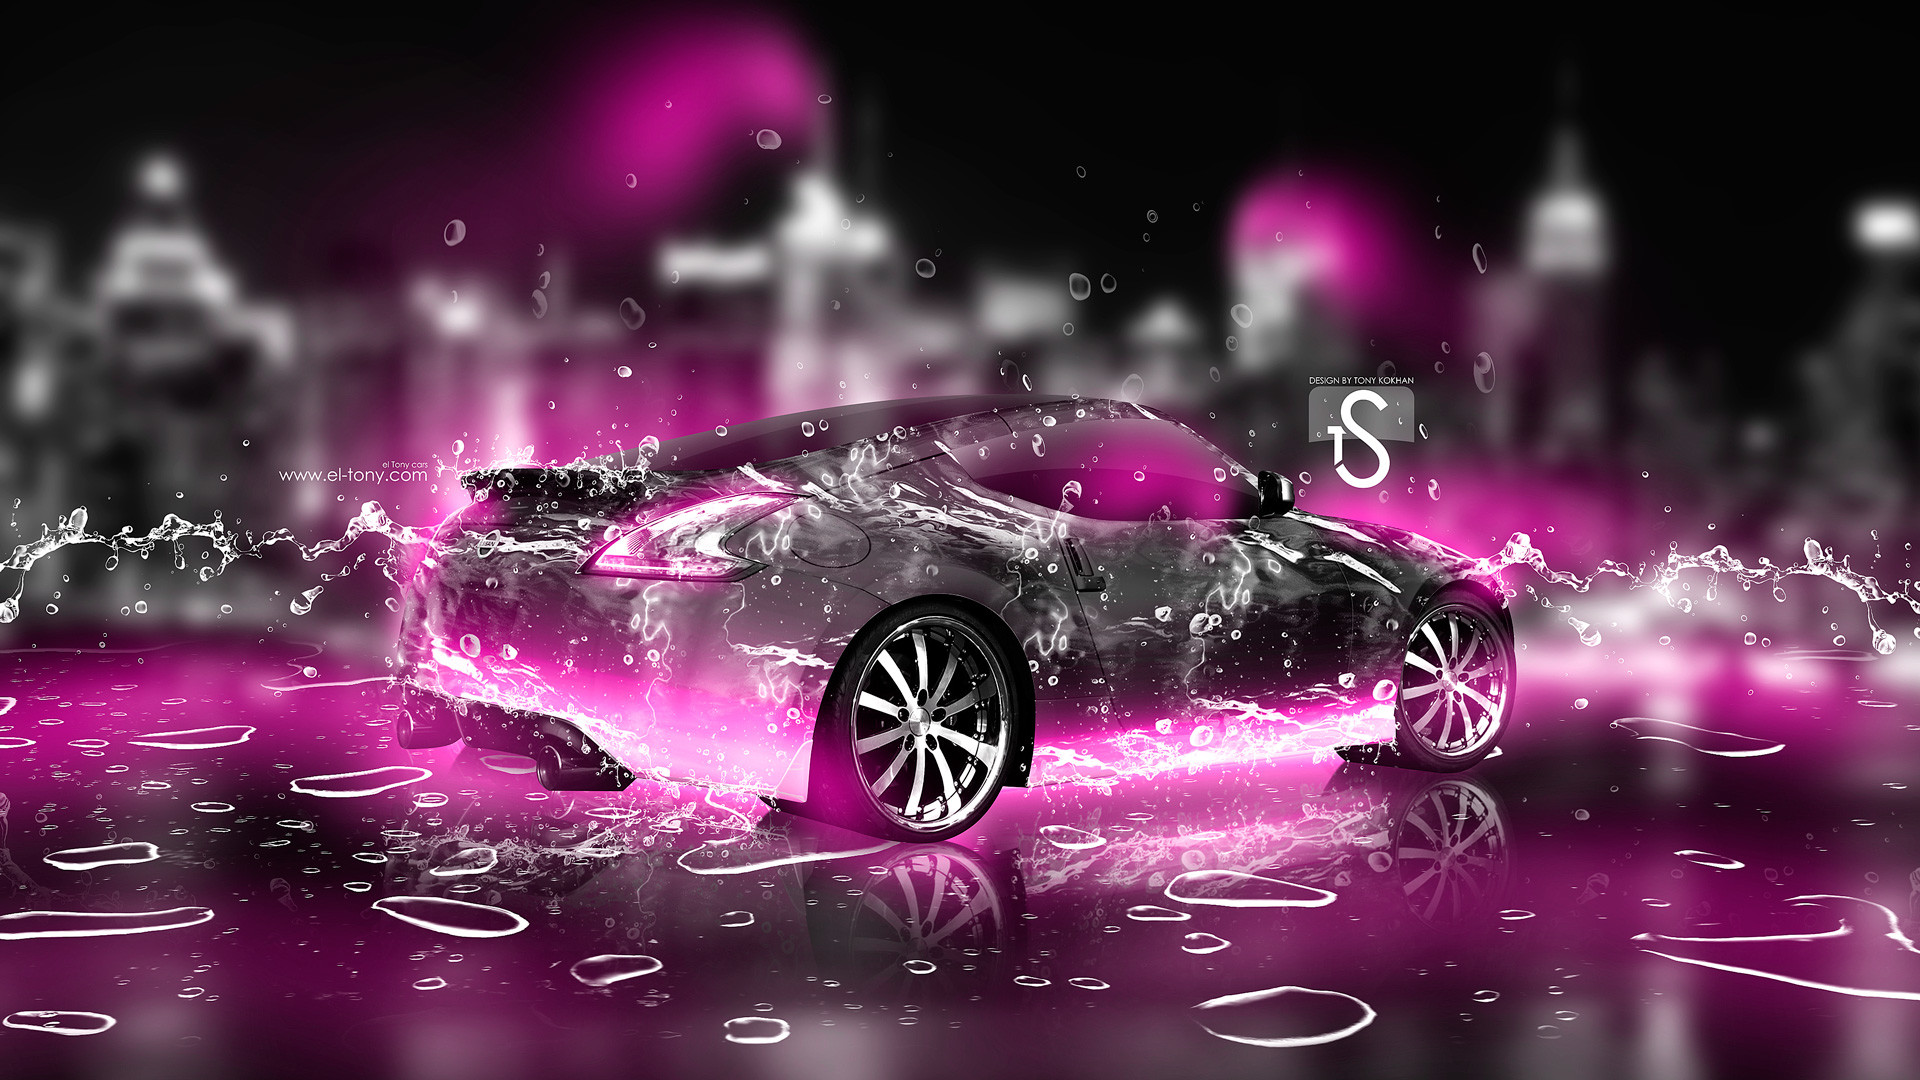 1920x1080 Neon Pink Wallpapers water city car 2013 pink 